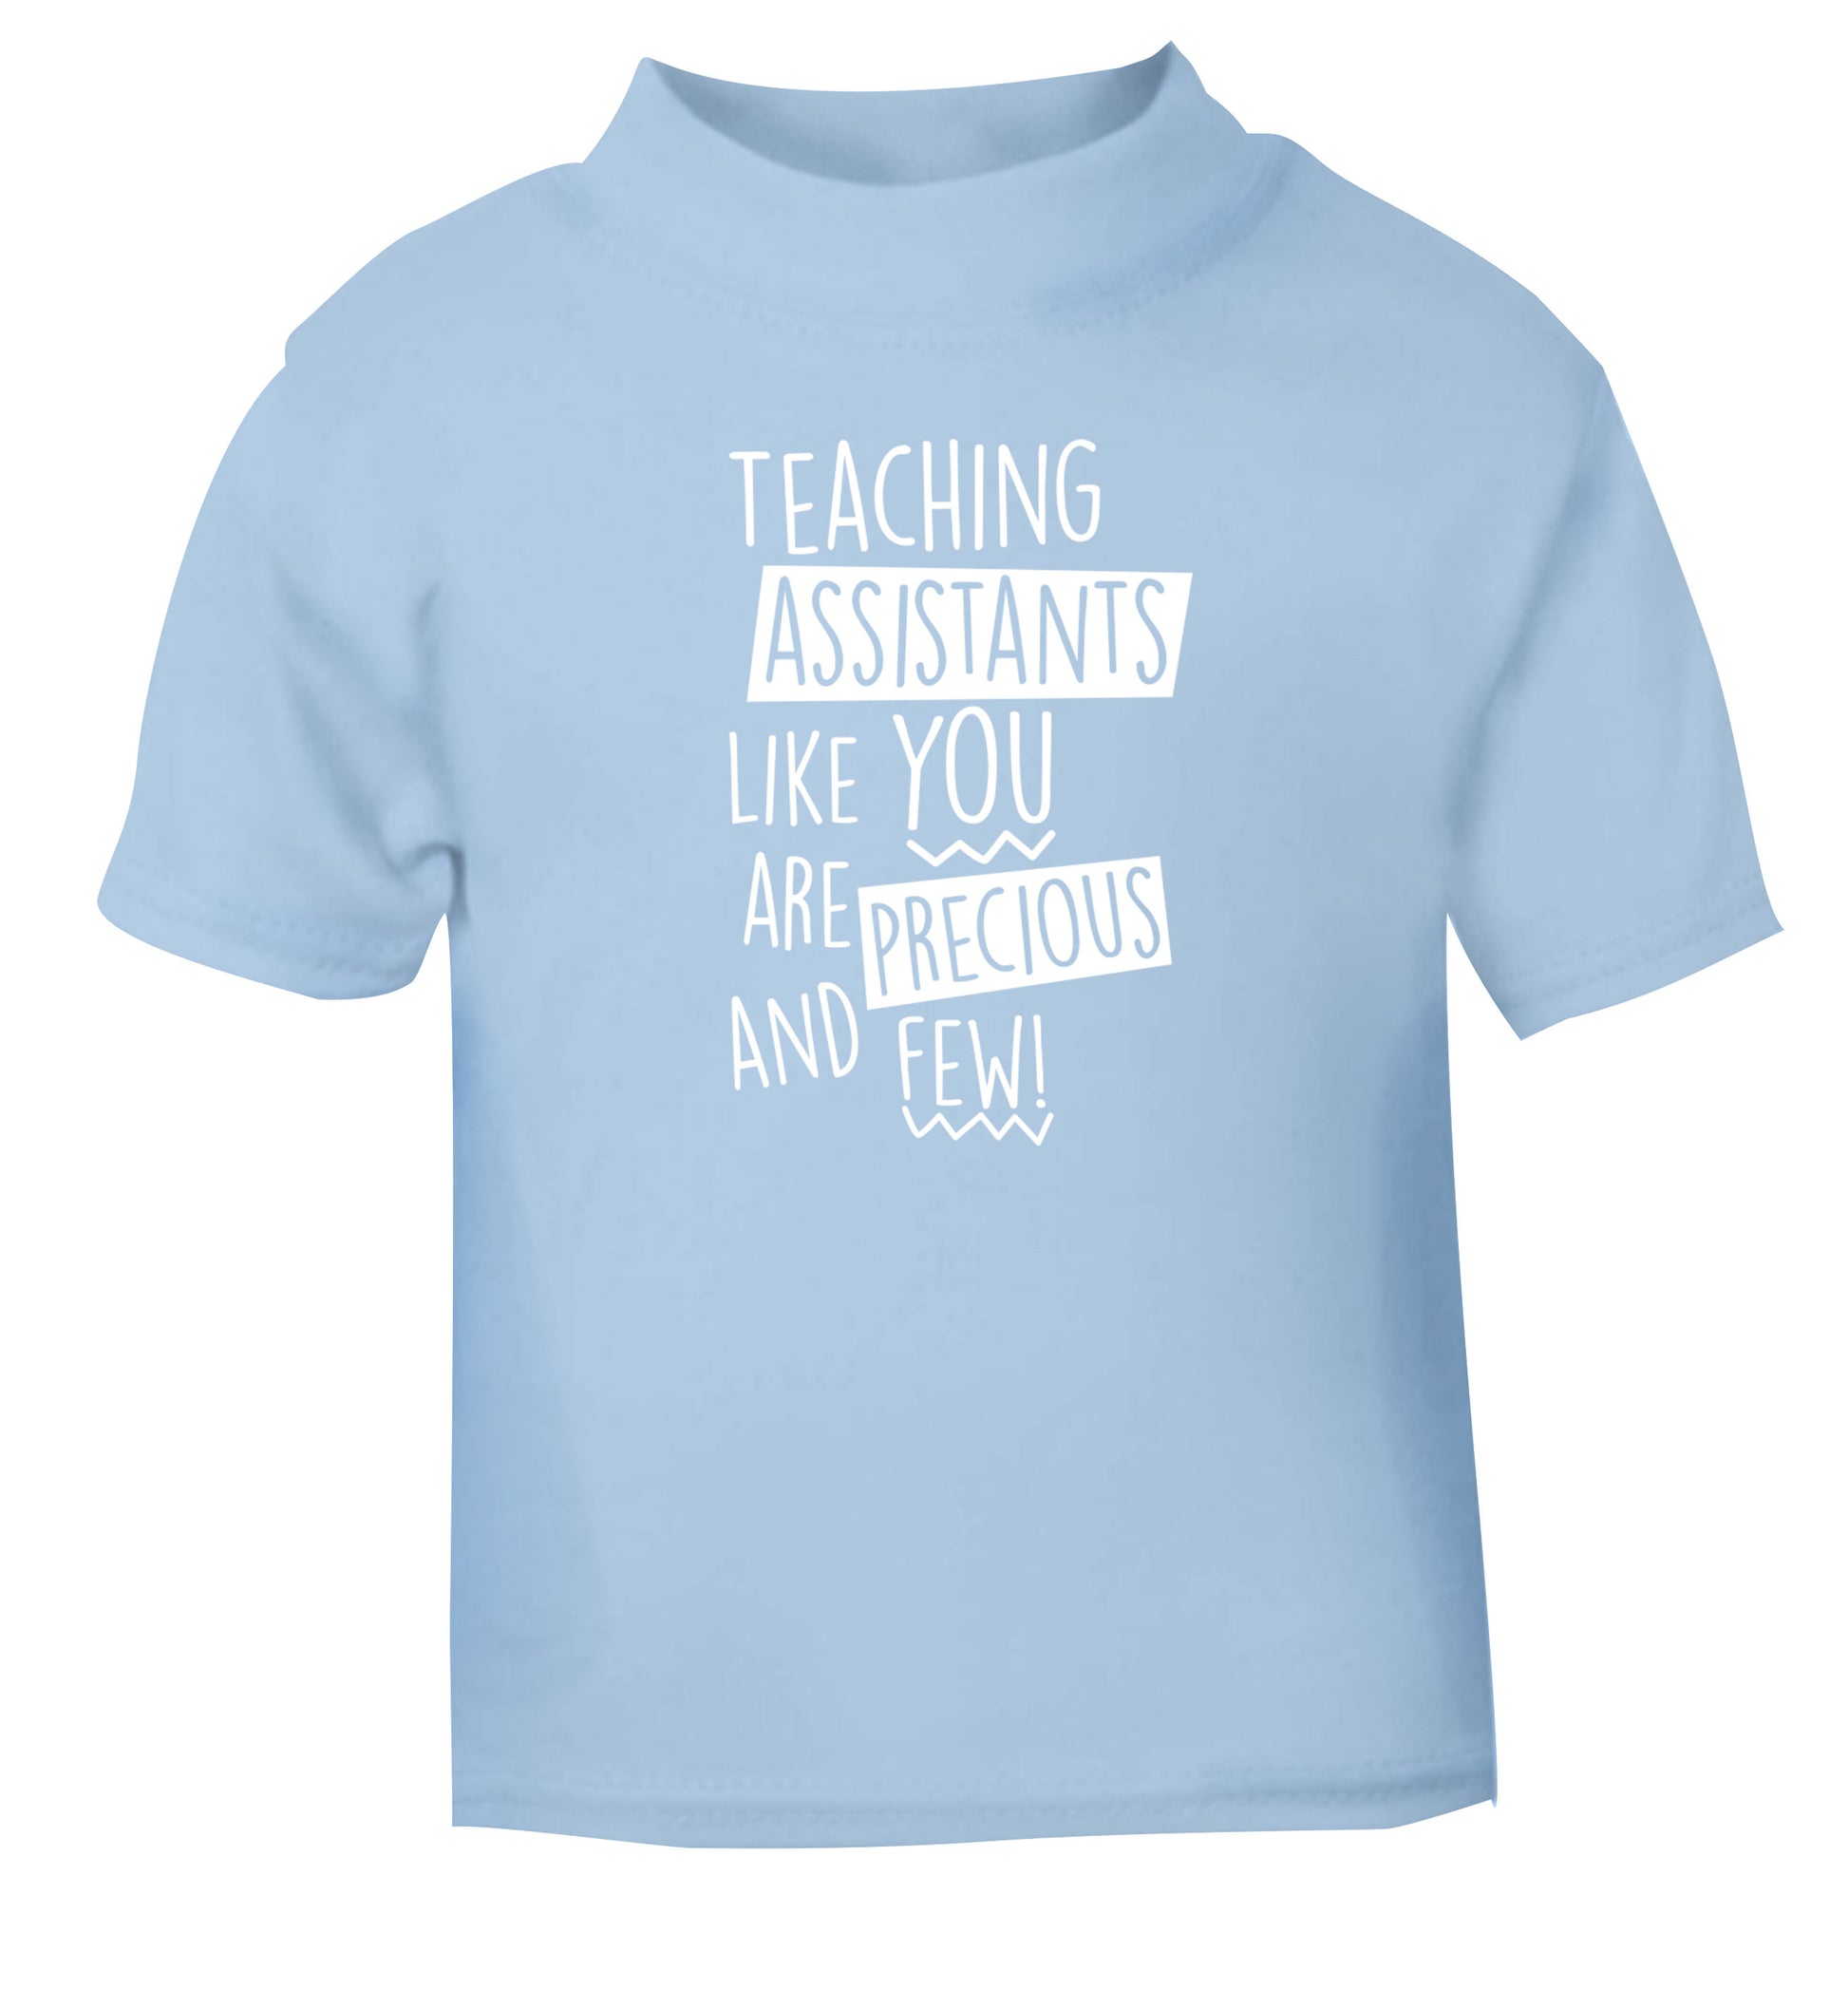 Teaching assistants like you are previous and few! light blue Baby Toddler Tshirt 2 Years